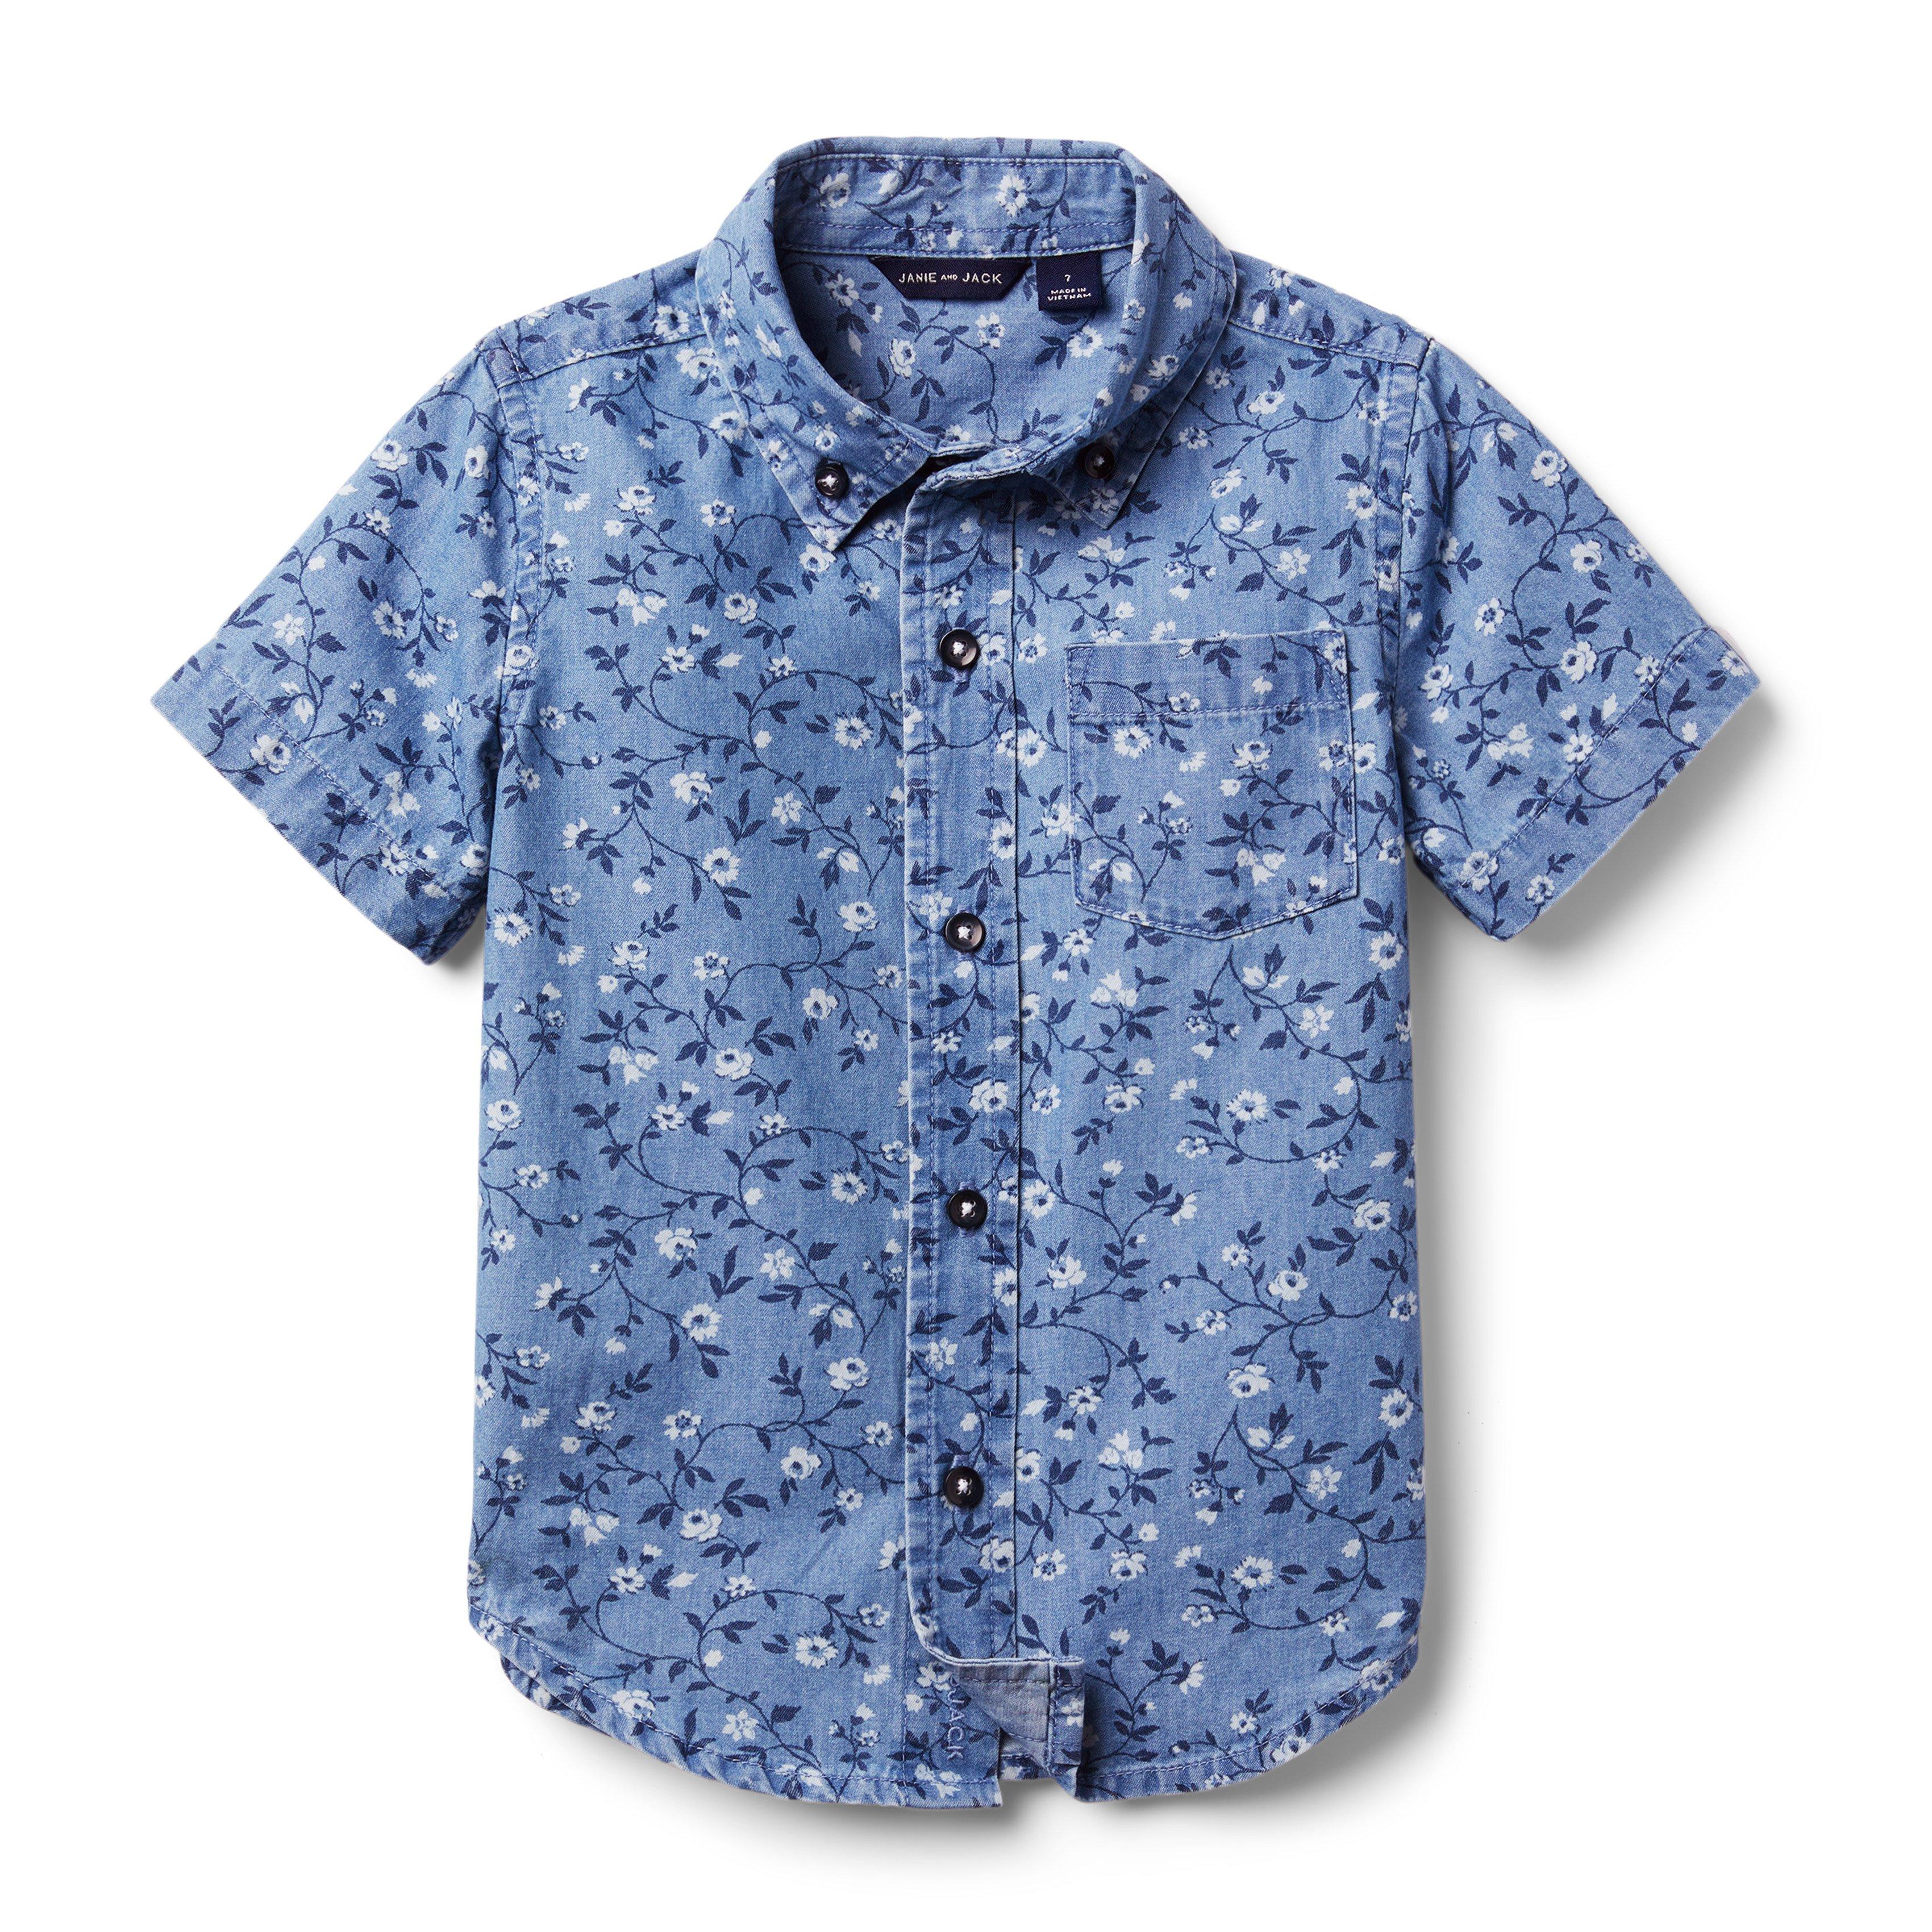 Boy Carolina Blue Floral Ditsy Floral Chambray Shirt by Janie and Jack